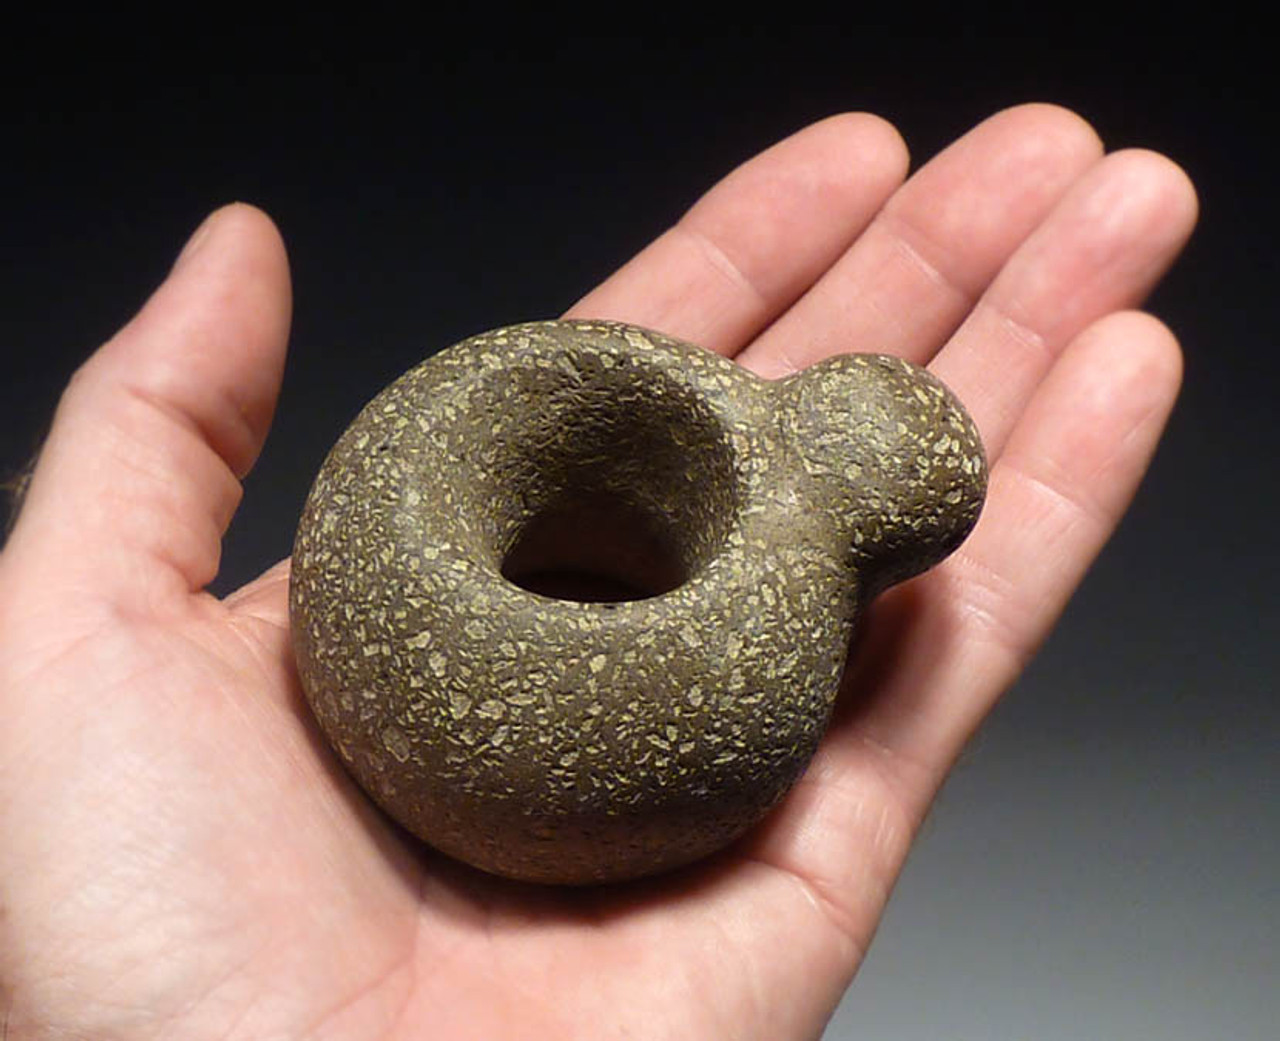 PC031 -  BEAUTIFUL PRE-COLUMBIAN BIRD EFFIGY STONE MACE HEAD FROM CENTRAL AMERICA MADE OUT OF UNUSUAL HARDSTONE